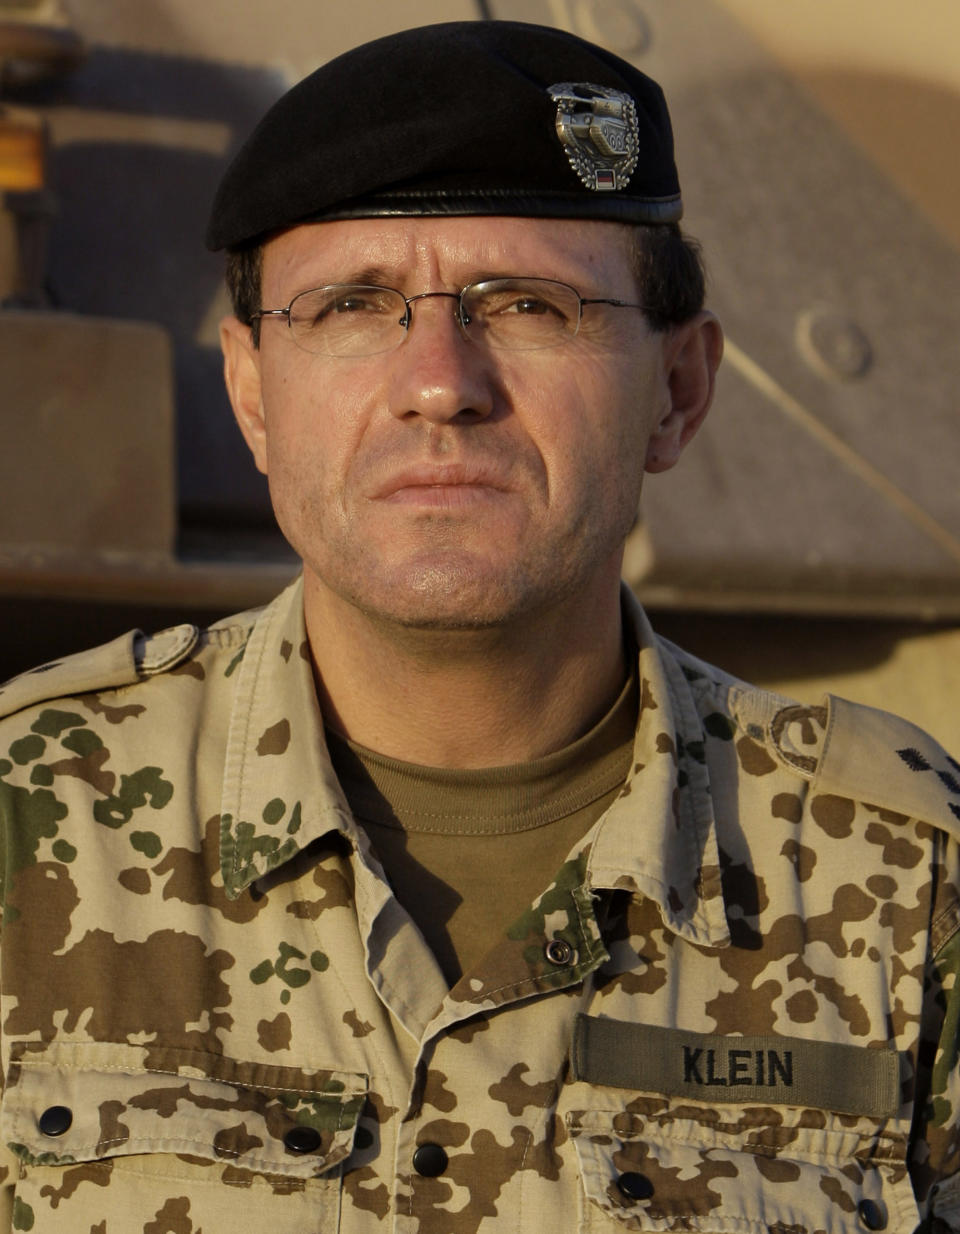 FILE - In this Sept. 6, 2009 file picture, German colonel Georg Klein is pictured at the German base in Kunduz, Afghanistan. The European Court of Human Rights on Tuesday rejected an Afghan man's case against German authorities' refusal to prosecute an officer who ordered the deadly bombing in 2009 of two fuel tankers in northern Afghanistan.(AP Photo/Anja Niedringhaus, File)